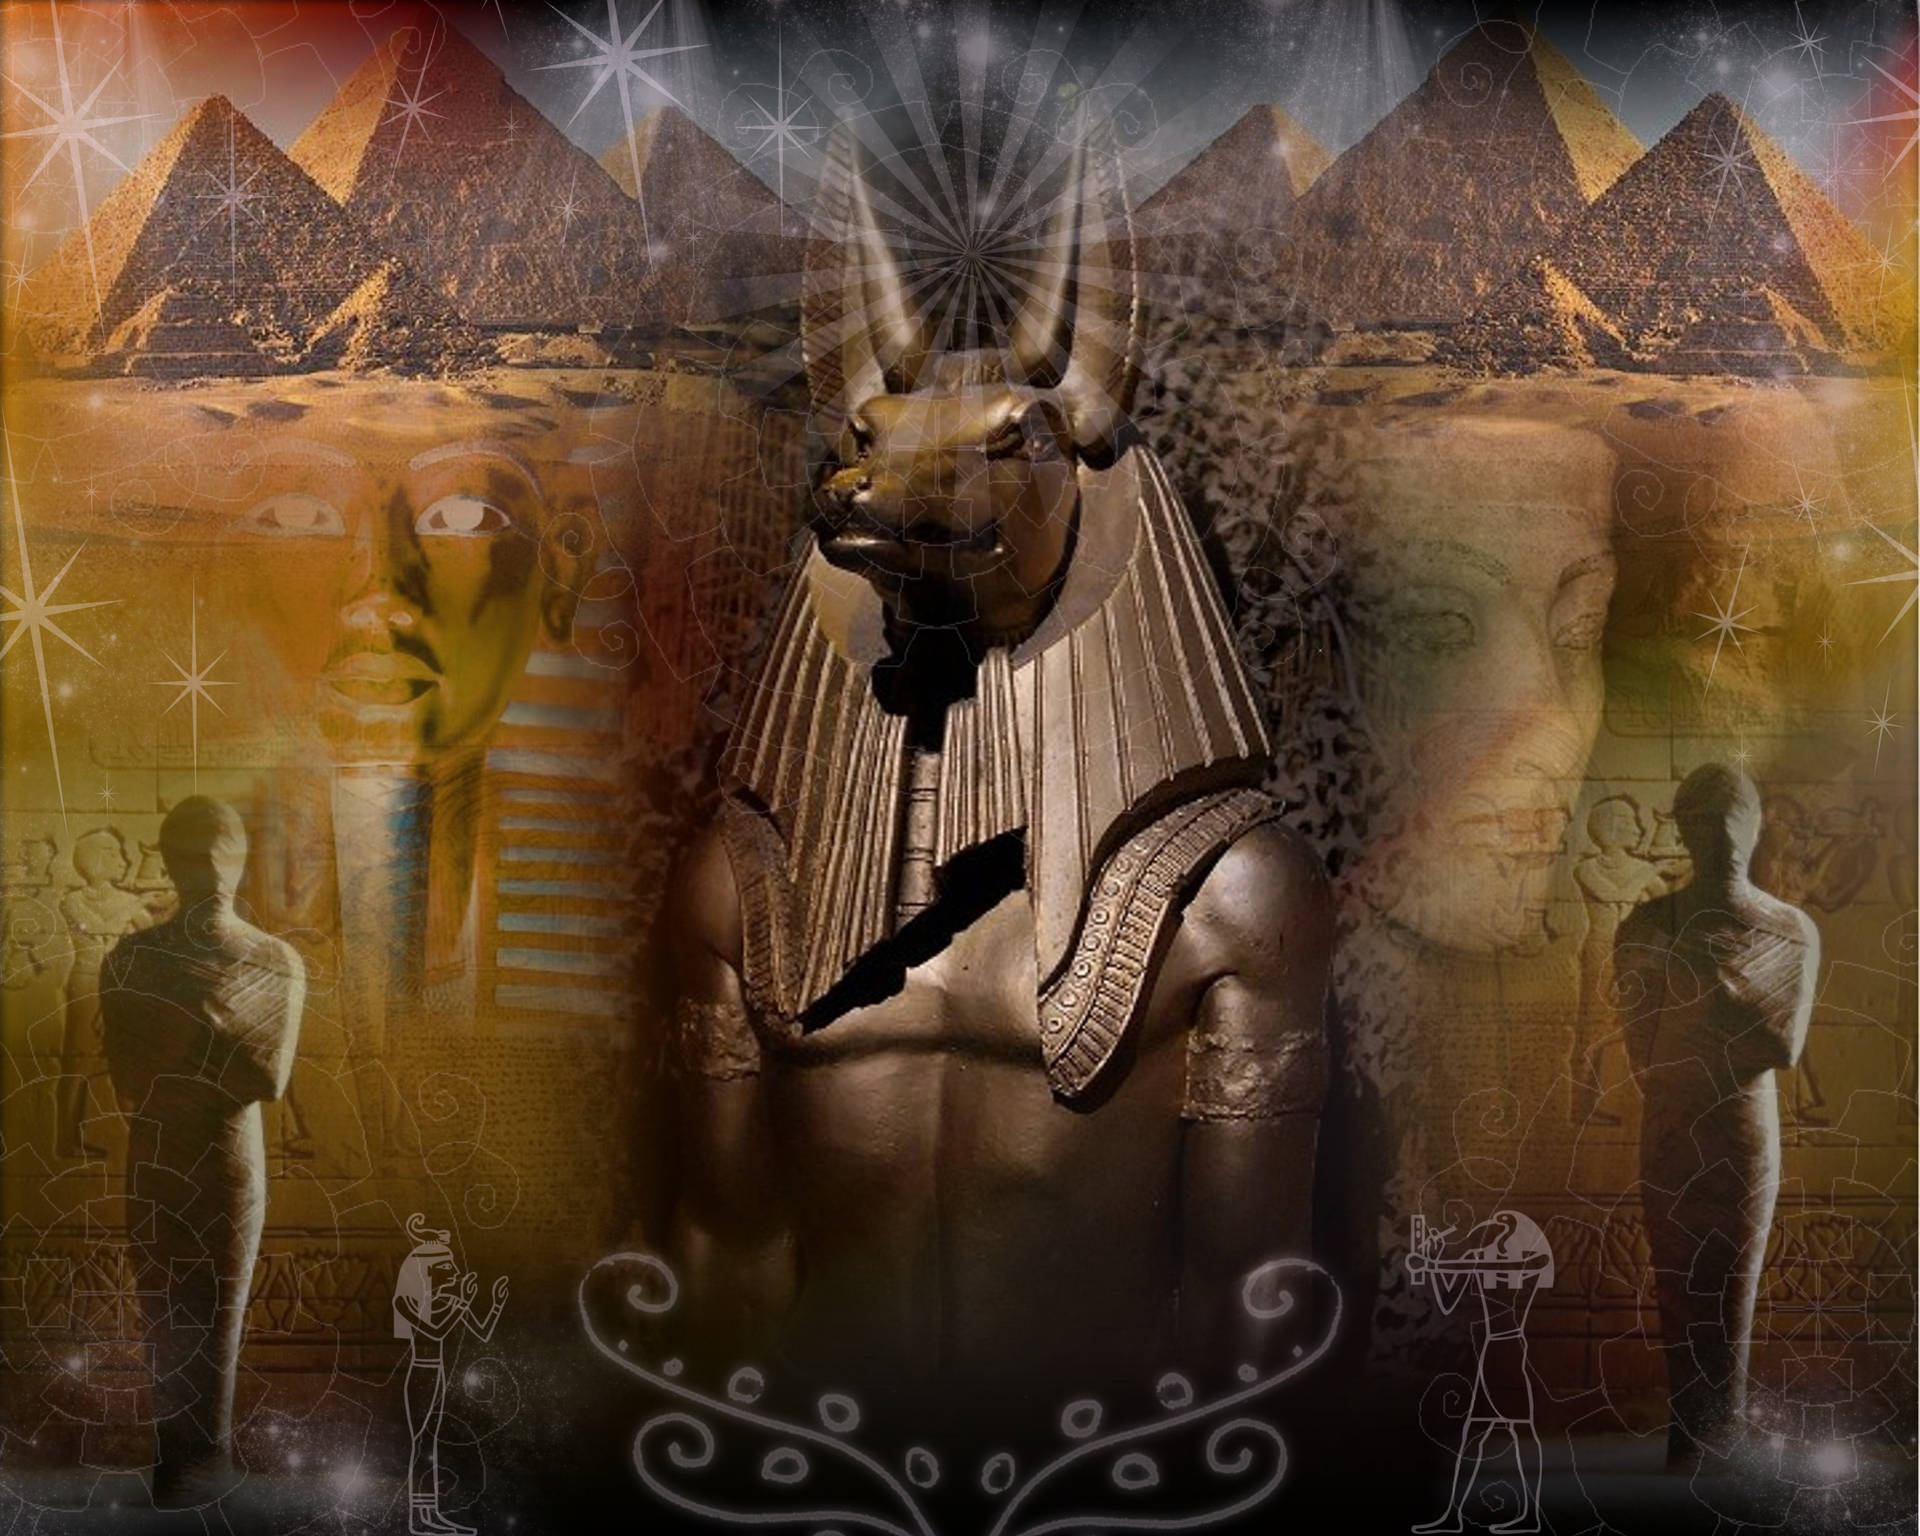 Majestic 4k Anubis - Guardian of The Afterlife. Wallpaper